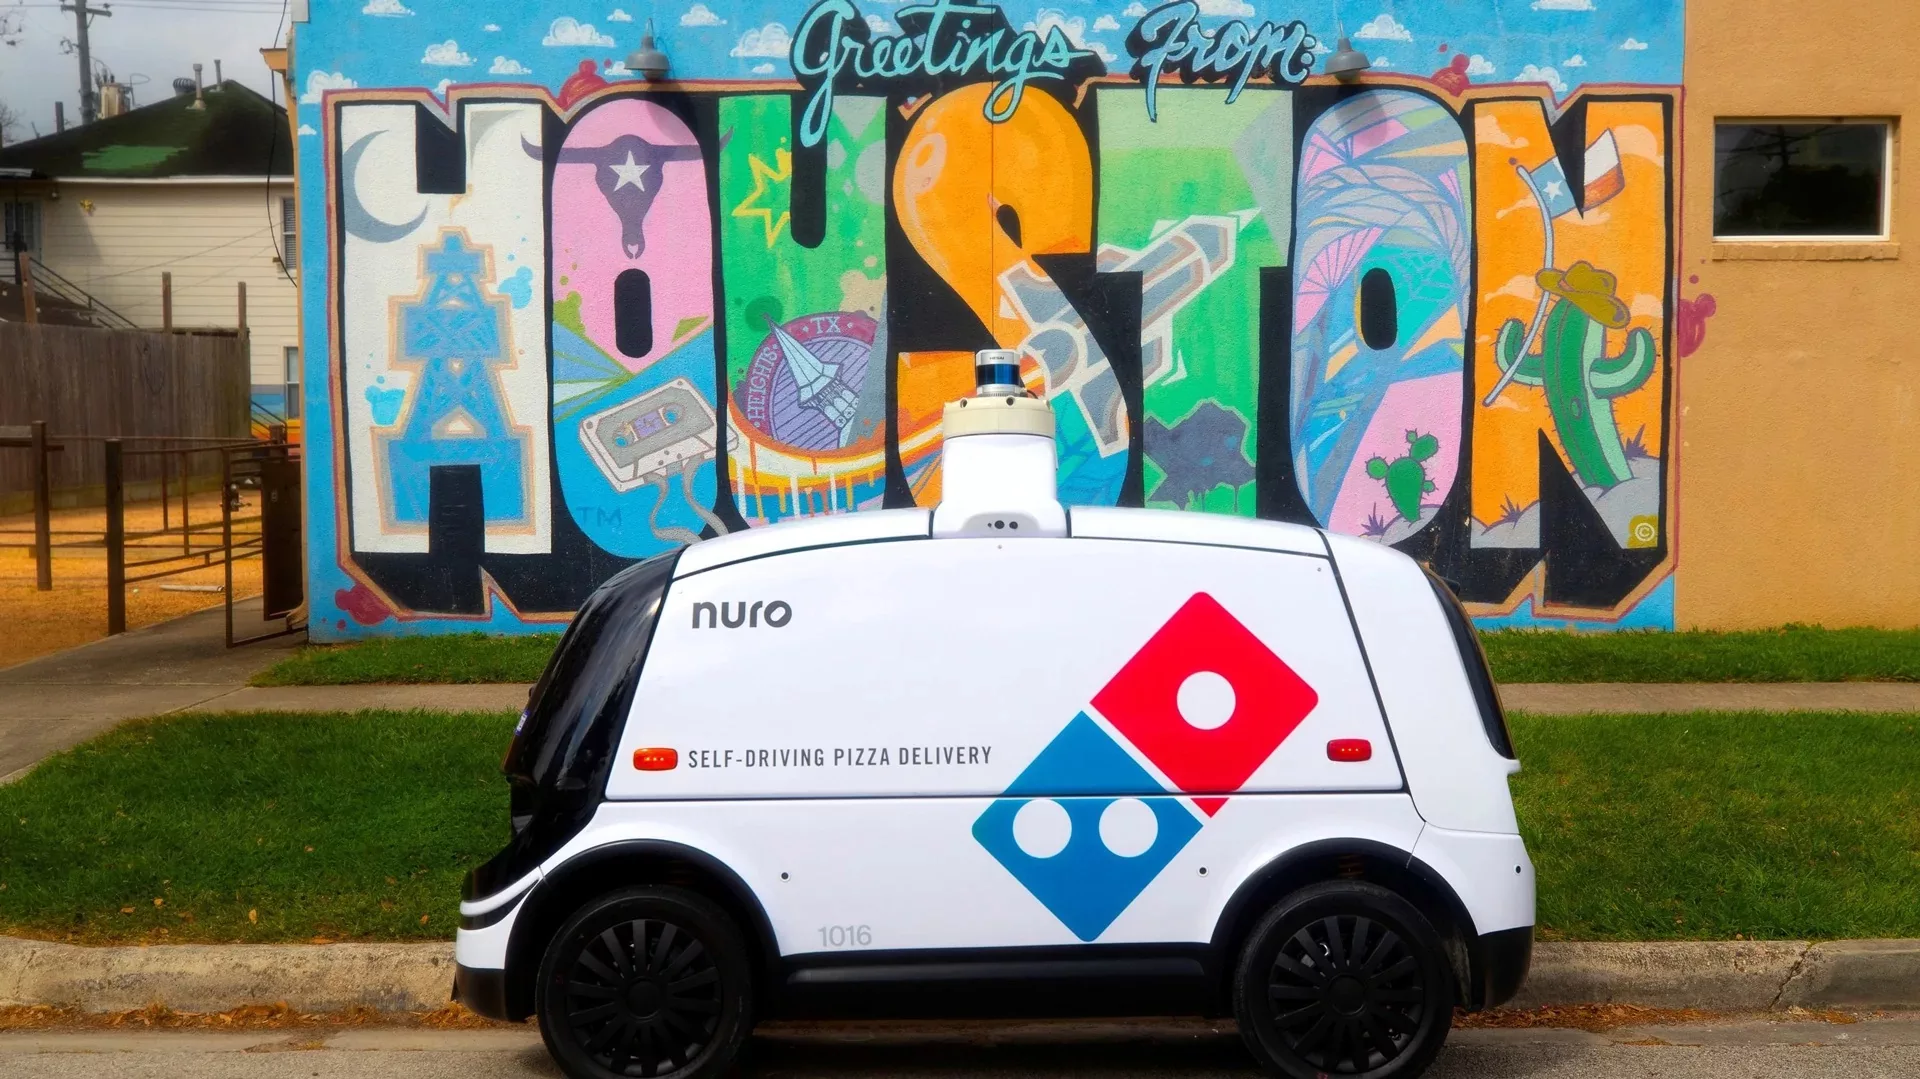 Nuro self-driving pizza delivery vehicle in front of colorful Houston mural.